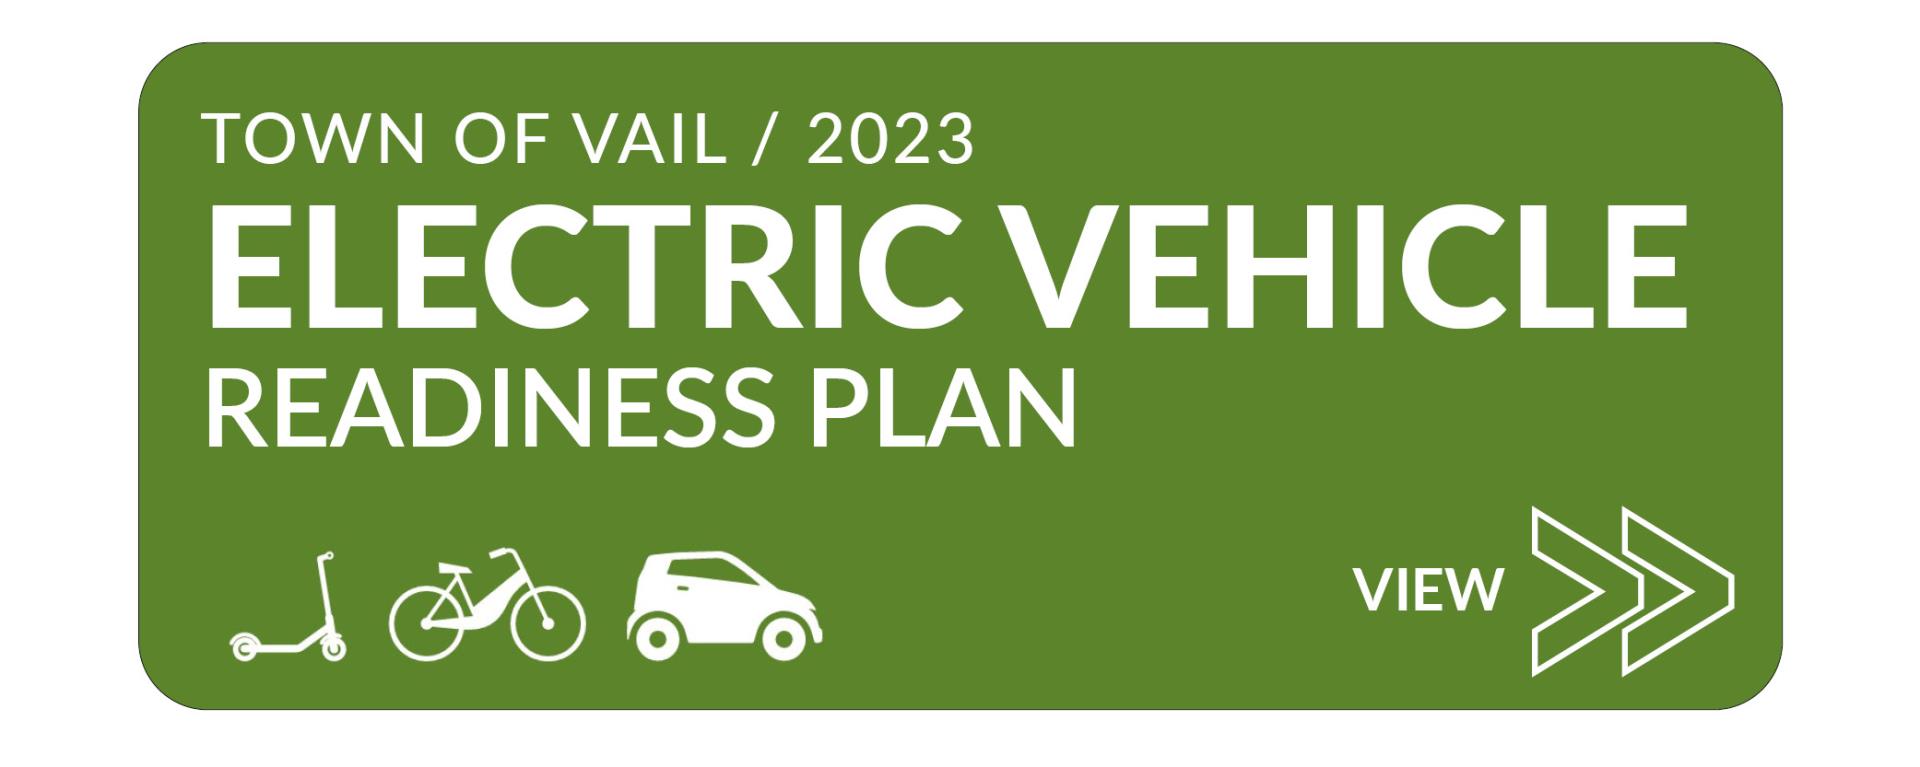 Electrical Vehicle Readiness Plan Button